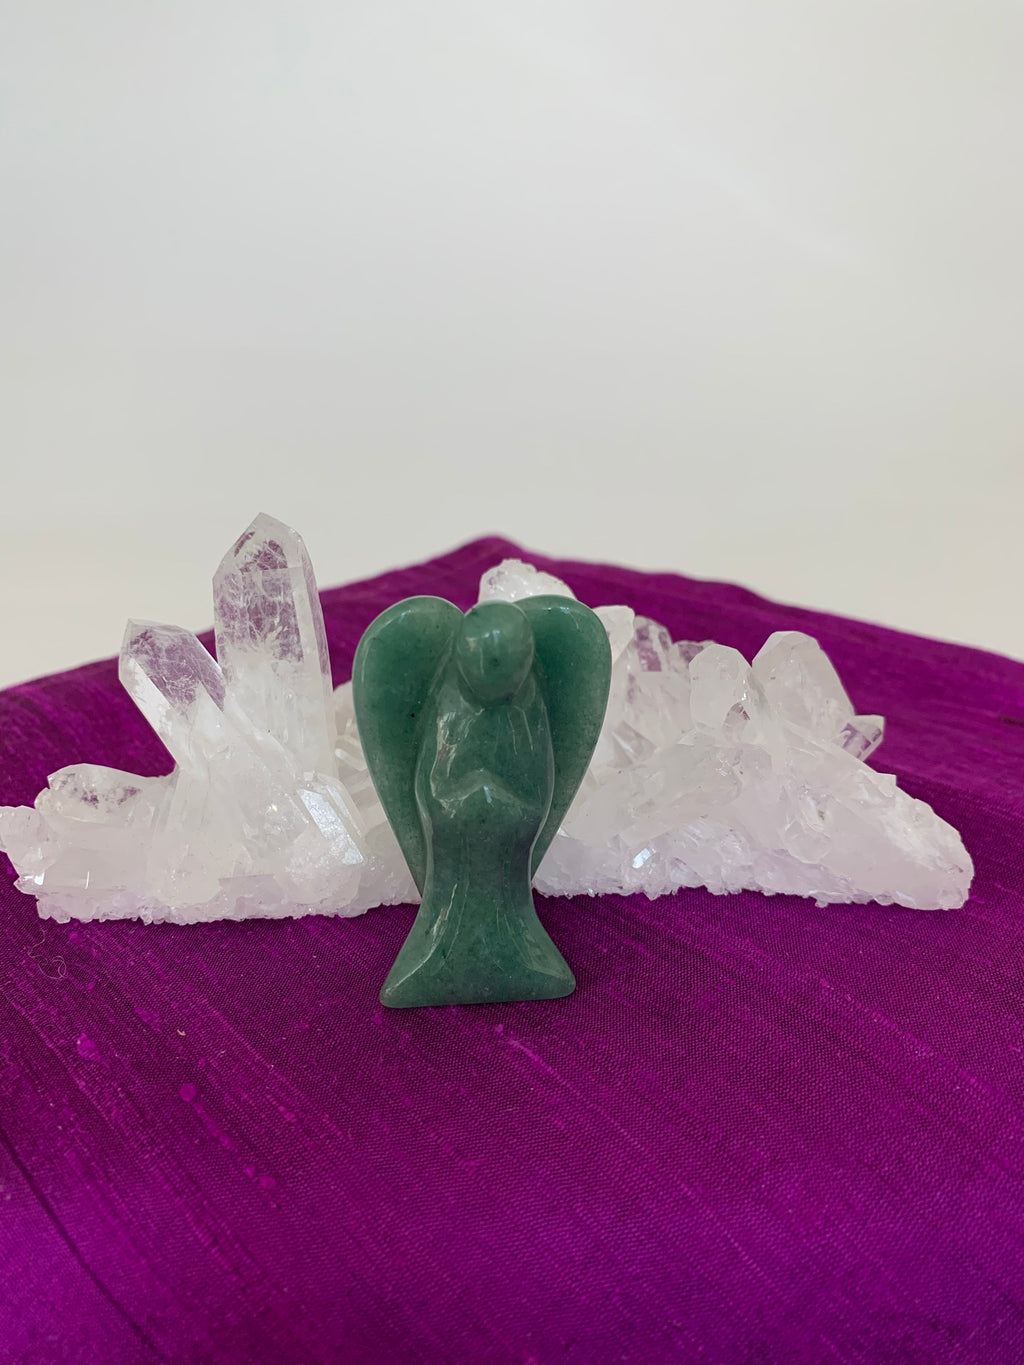 Lovely Aventurine angel is perfect for your altar, meditation space, to hold while meditating, or anywhere you want to radiate the energy of prosperity & compassion. ♥.  A great gift too! Aventurine is a stone of prosperity (another crystal I used to keep in my cash register :). It is also associated with leadership & decisiveness. It promotes compassion and empathy and helps in emotional recovery. Physically, it is said to relieve migraines and allergies. Size is approximately 2" tall. 